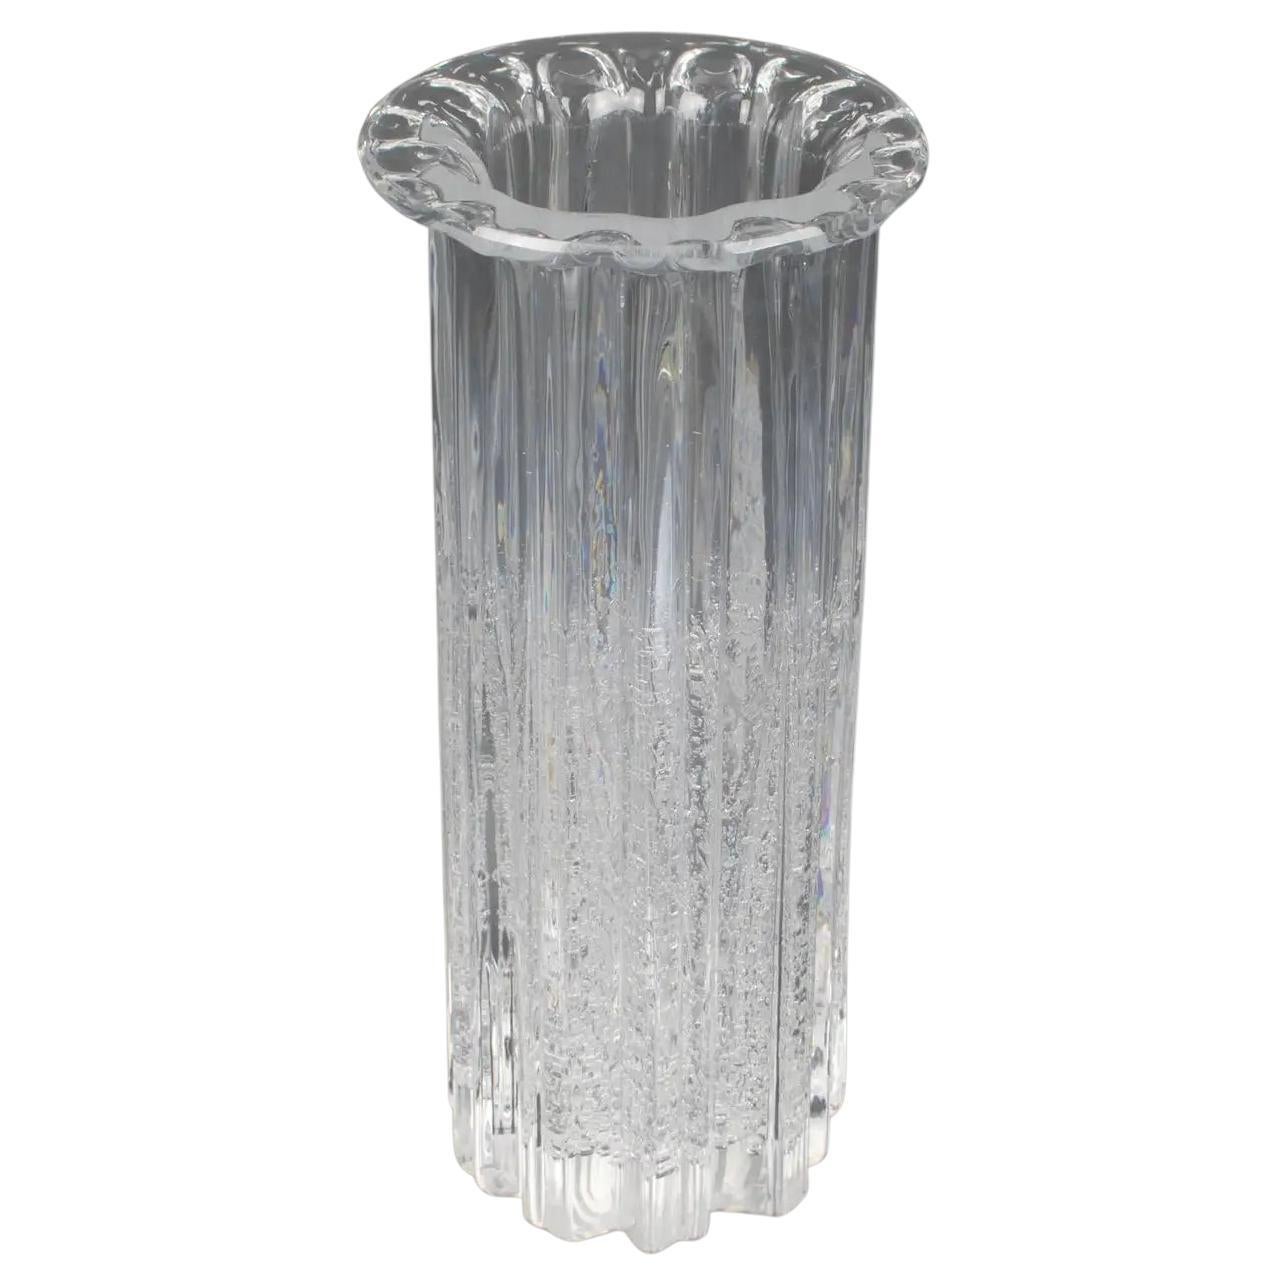 Willy Johansson for Hadeland Norway Art-Glass "Atlantic" Tall Vase For Sale